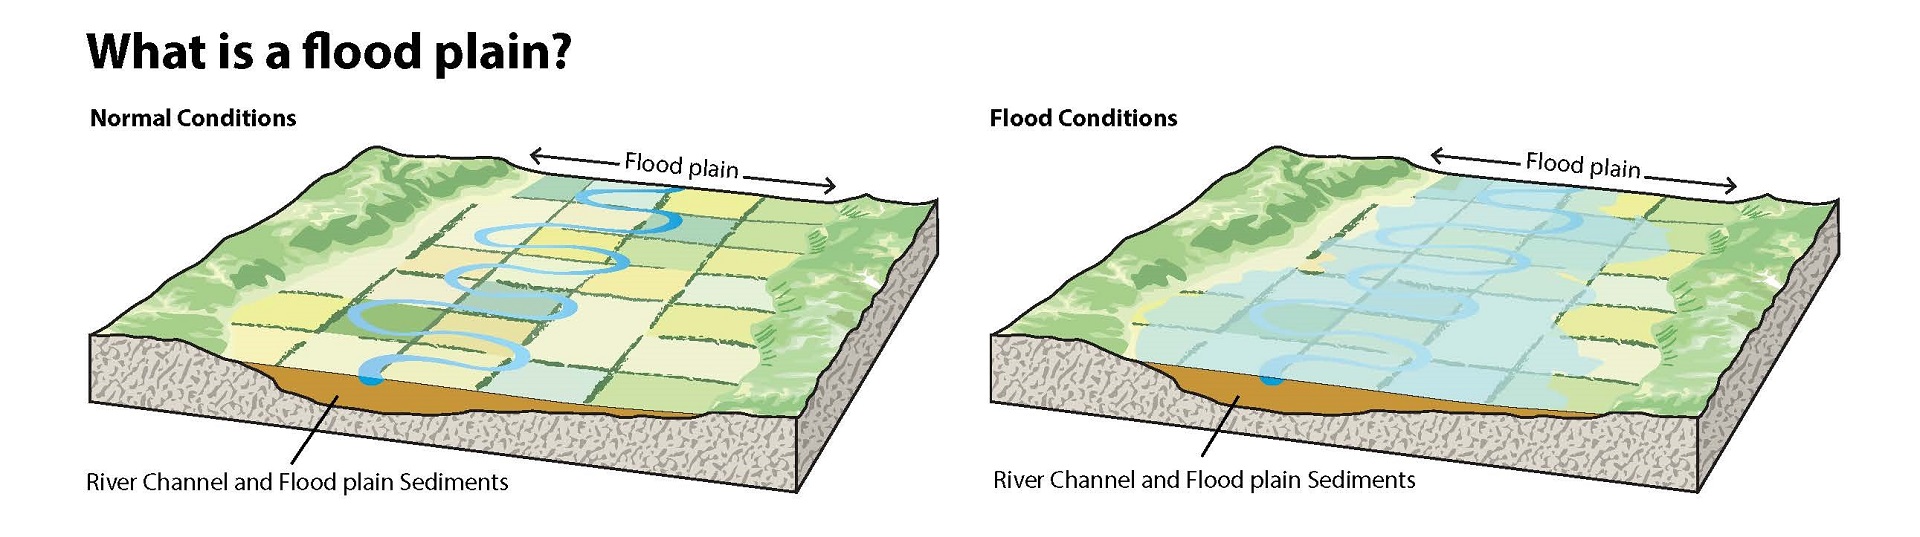 A floodplain under normal conditions and flood conditions. Under normal conditions, there is a meandering river and green space on either side of the river. In the flood conditions, the water expands beyond the reach of the river and fills the green space that was dry in normal conditions. 